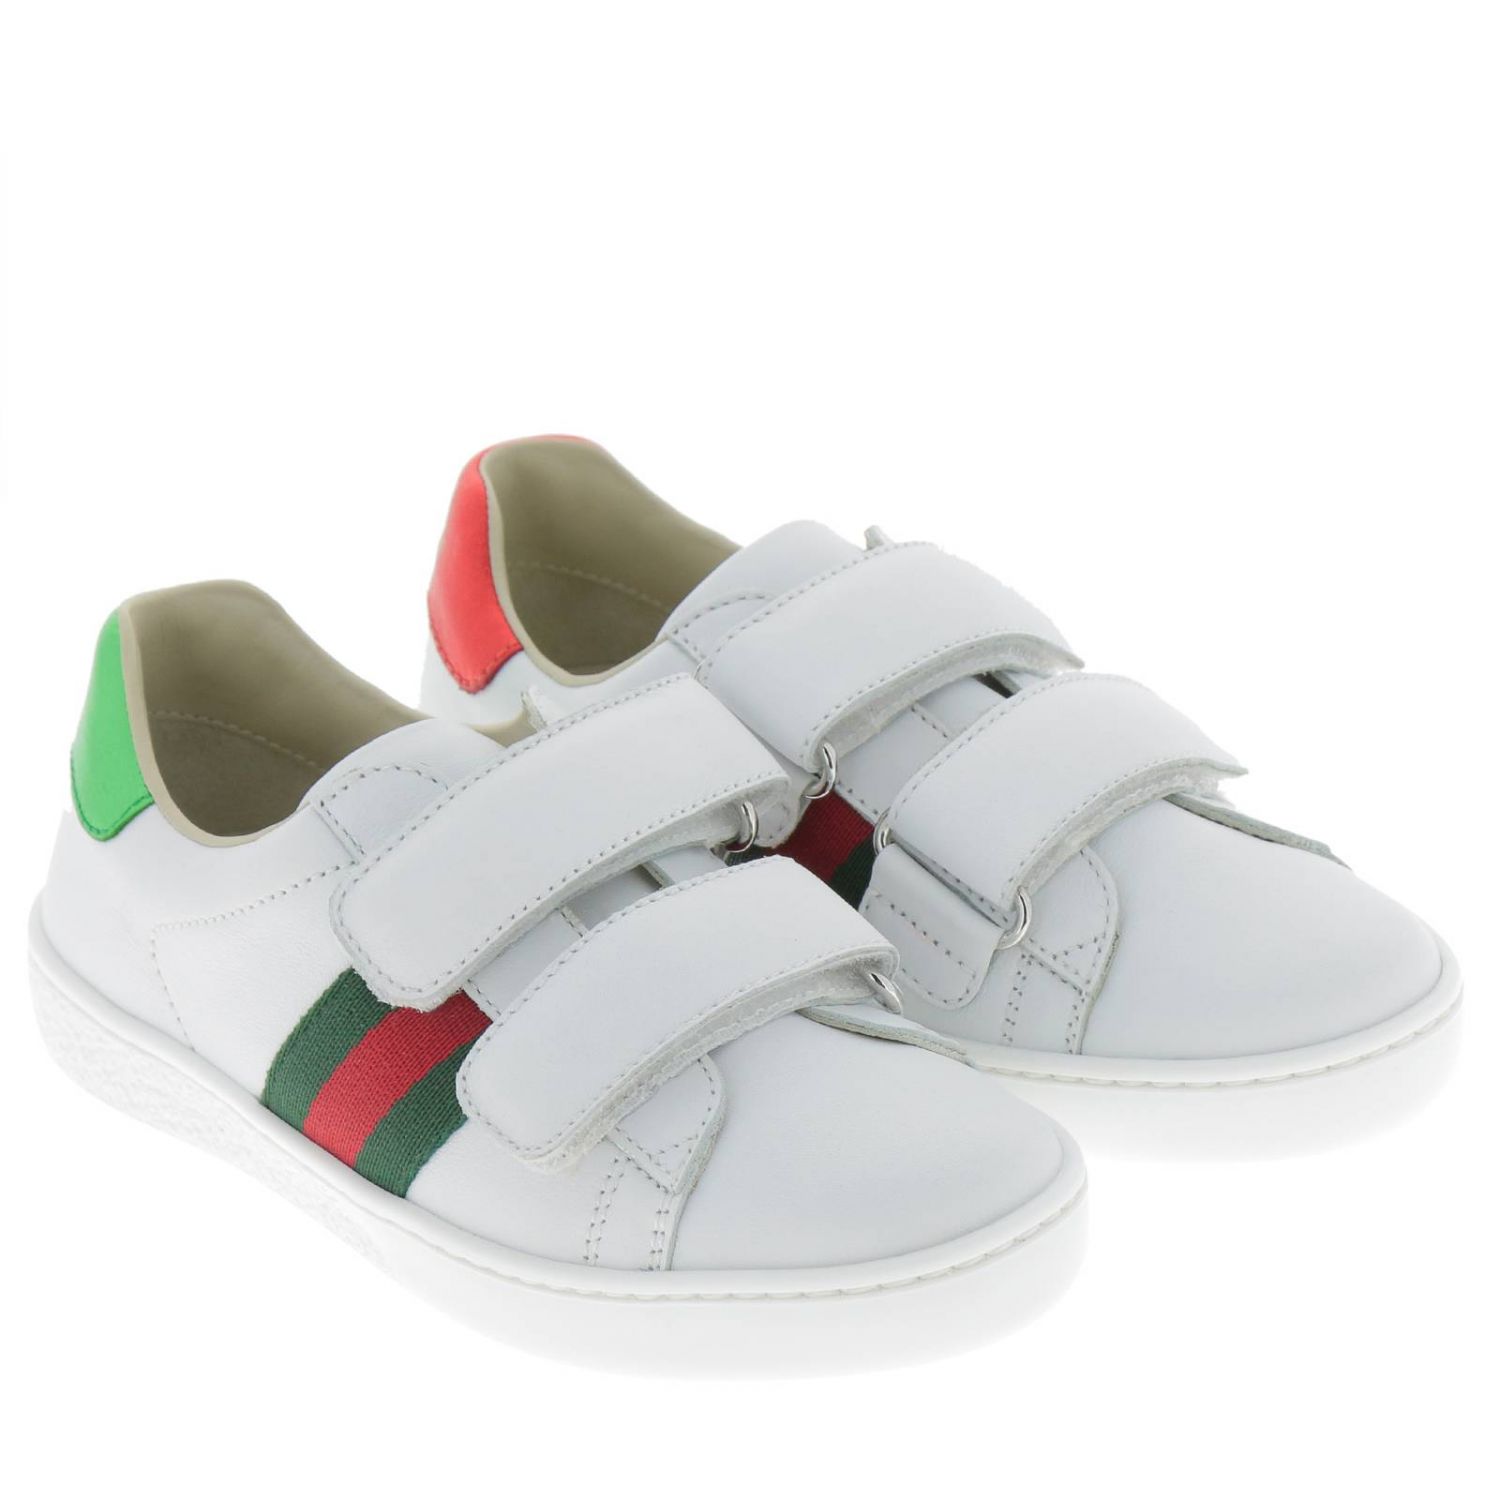 GUCCI: New Ace sneakers in leather with velcro buckles and Web bands ...